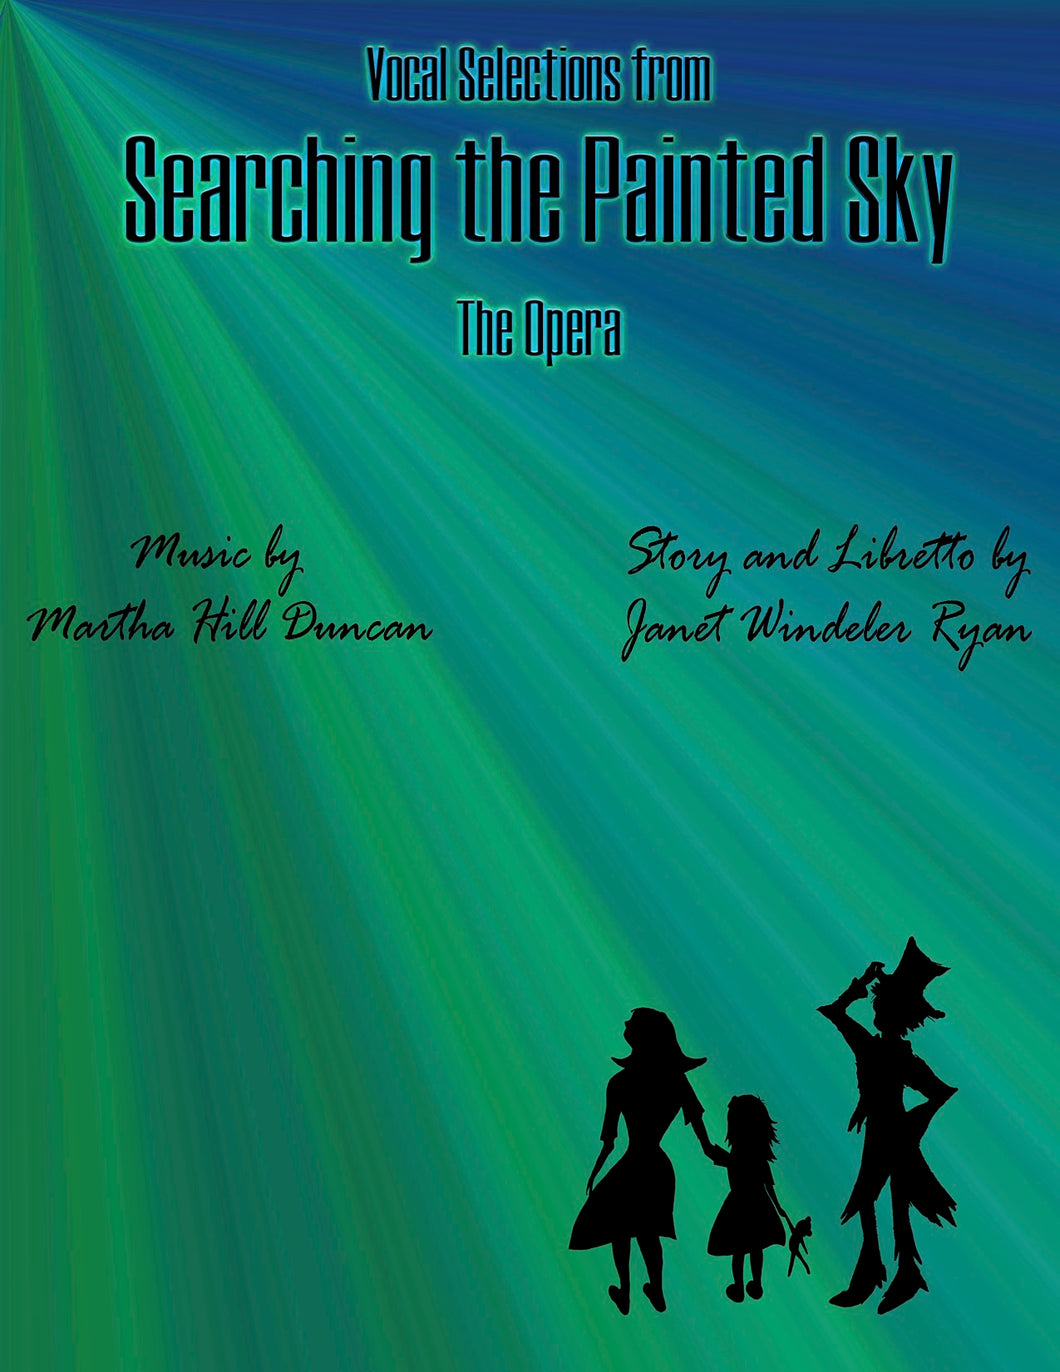 SUNSET SONG - Voice & Piano from SEARCHING THE PAINTED SKY, THE OPERA